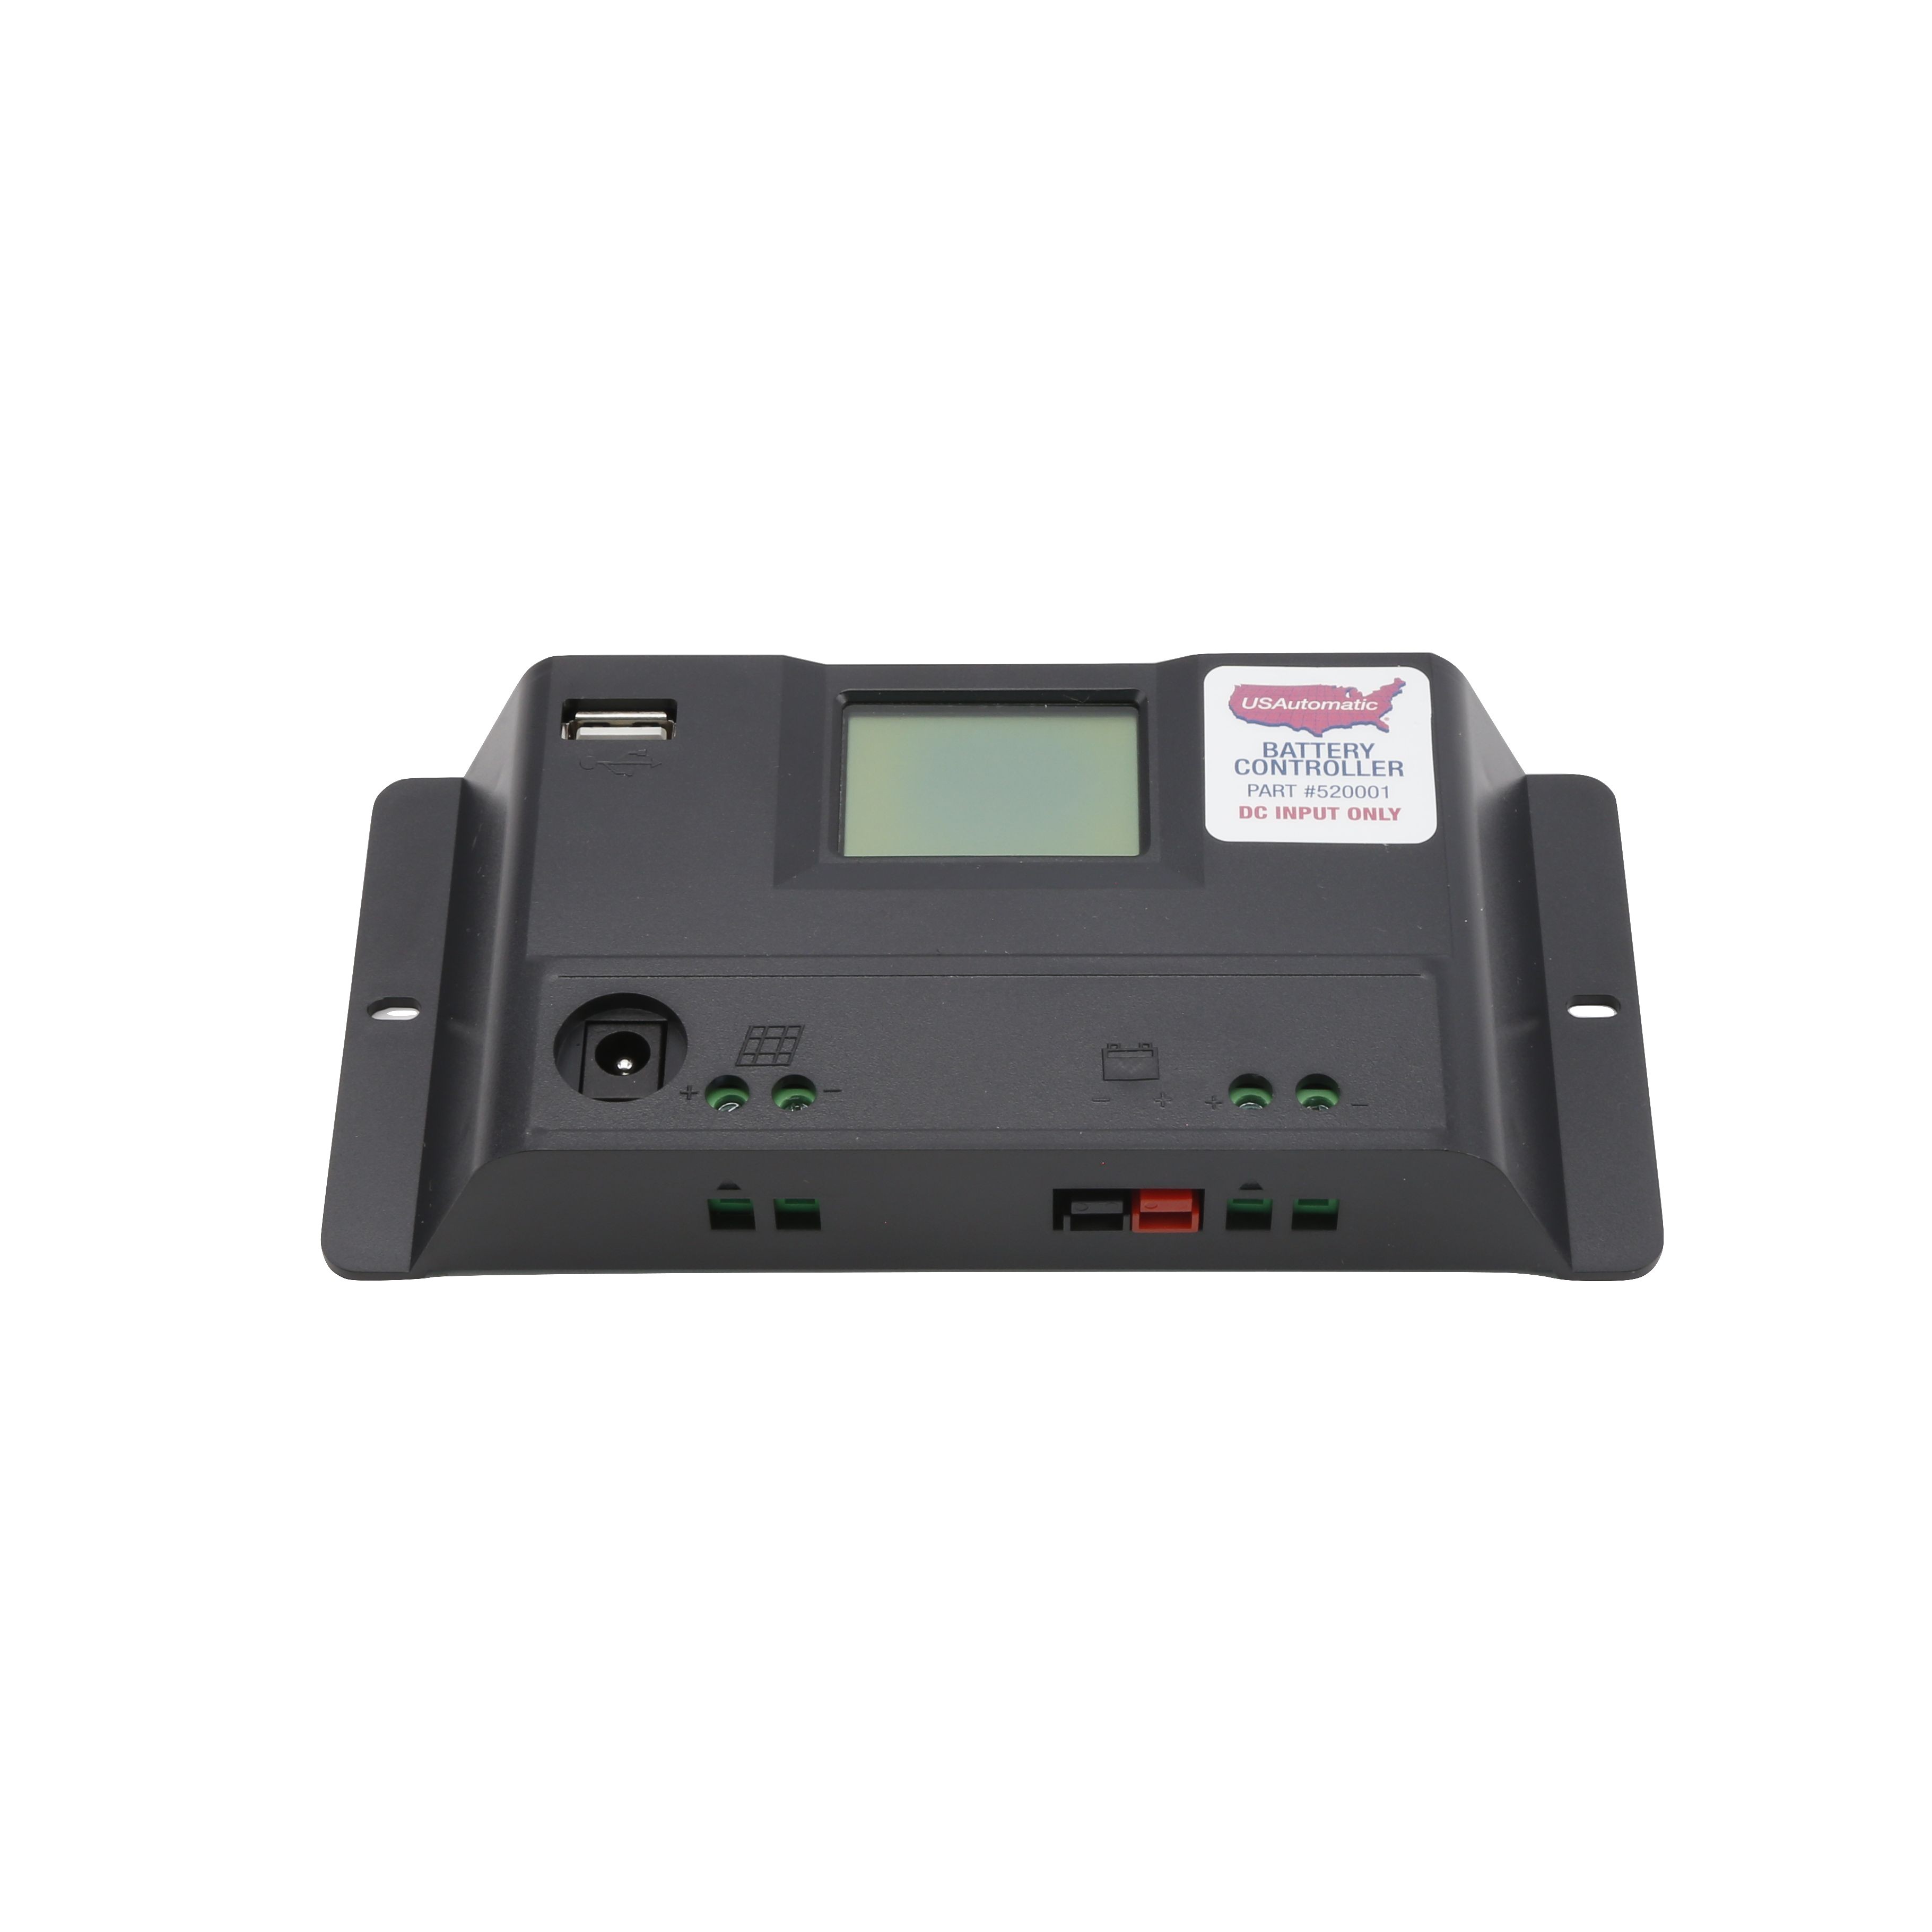 https://usautomaticgateopeners.com/store/media/catalog/product/cache/1/image/9df78eab33525d08d6e5fb8d27136e95/5/2/520001_usautomatic-battery-controller-and-solar-charger-12v-or-24v-10-amp-dc-only---usautomatic-520001_1.jpg